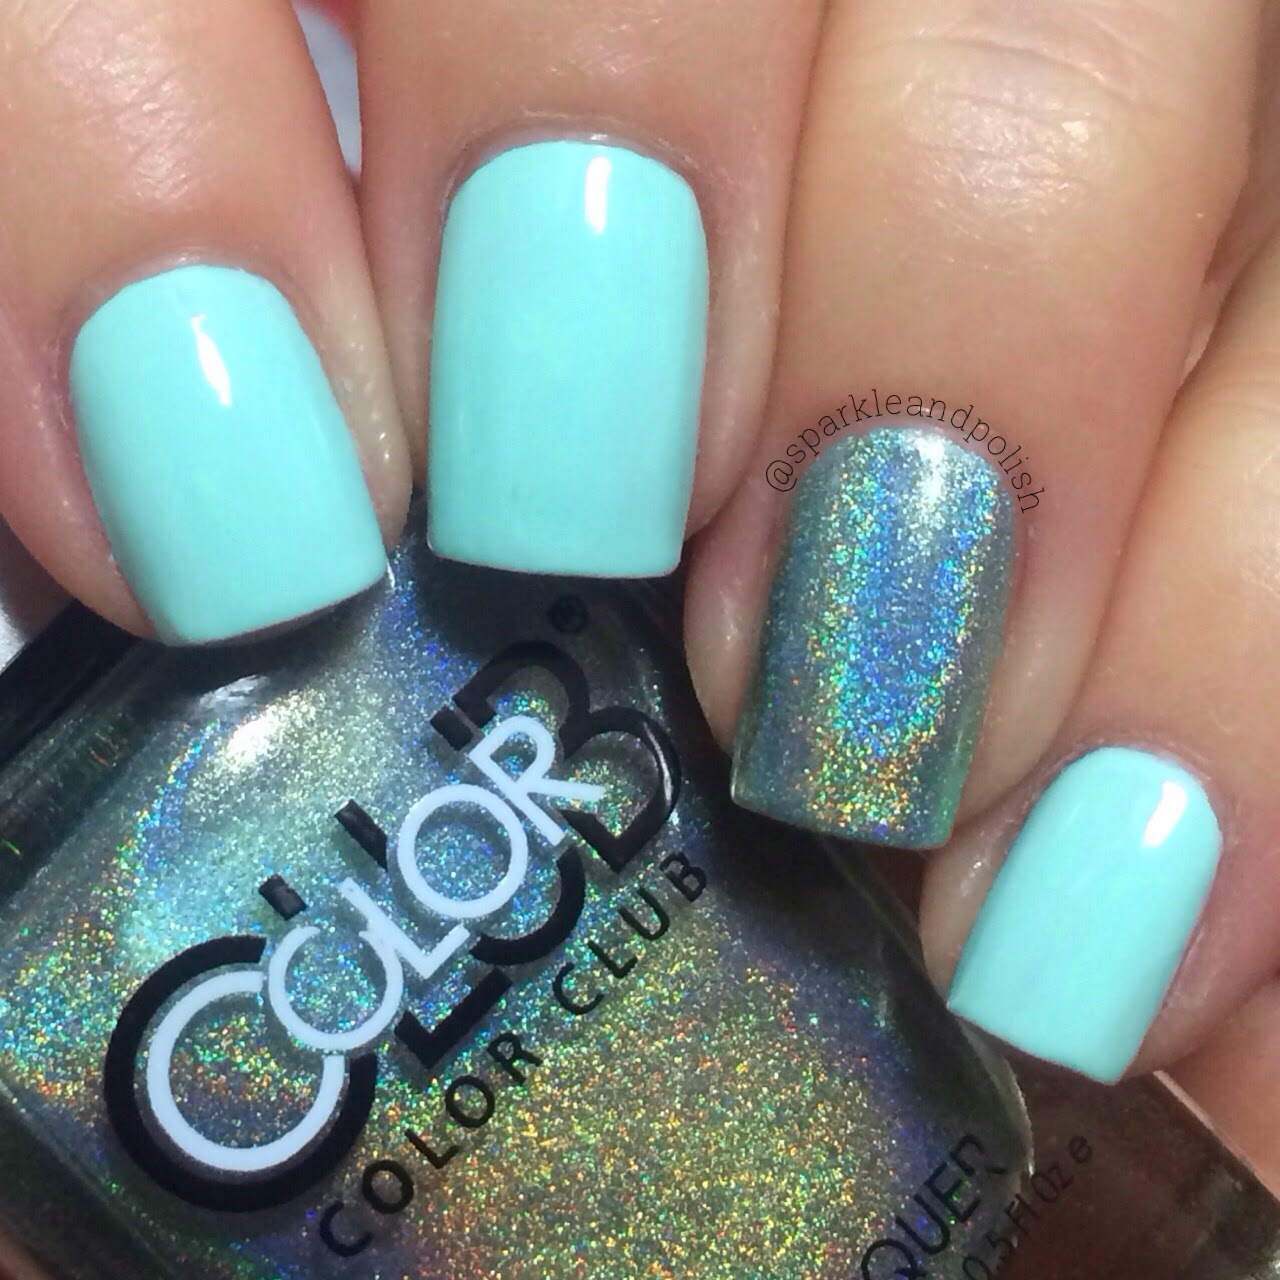 A Little Sparkle and Polish: Holographic Mermaid Nails